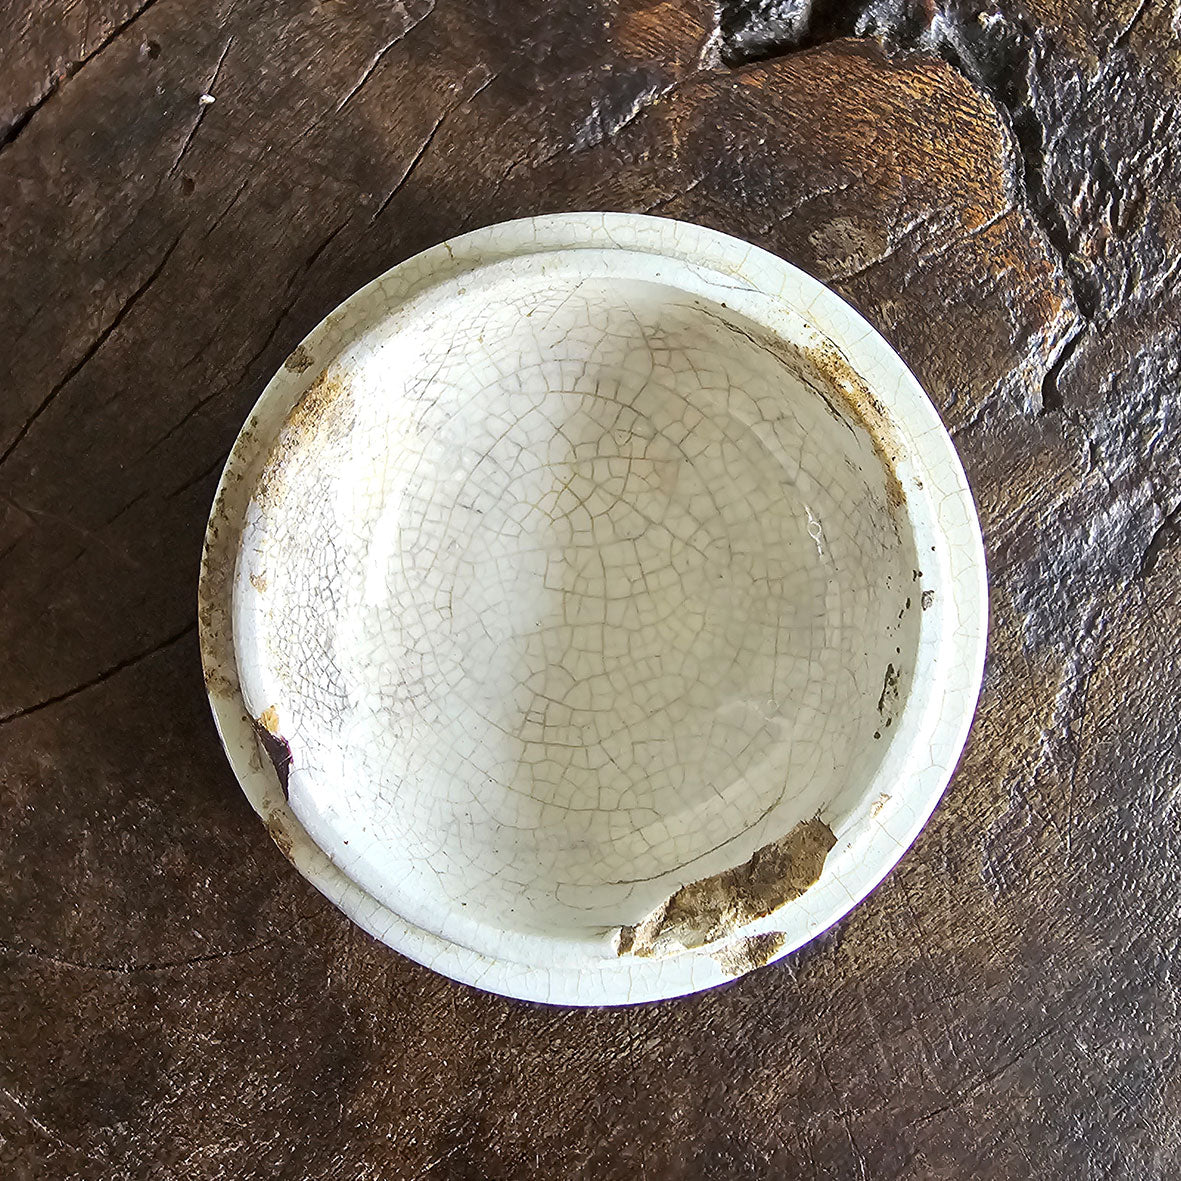 An Edwardian A Boots Cold Cream Pot. Lovely crazing to the glazes surface. Marked 'TOO GOOD - PATENT - LONDON'. - SHOP NOW -Intovintage.co.uk